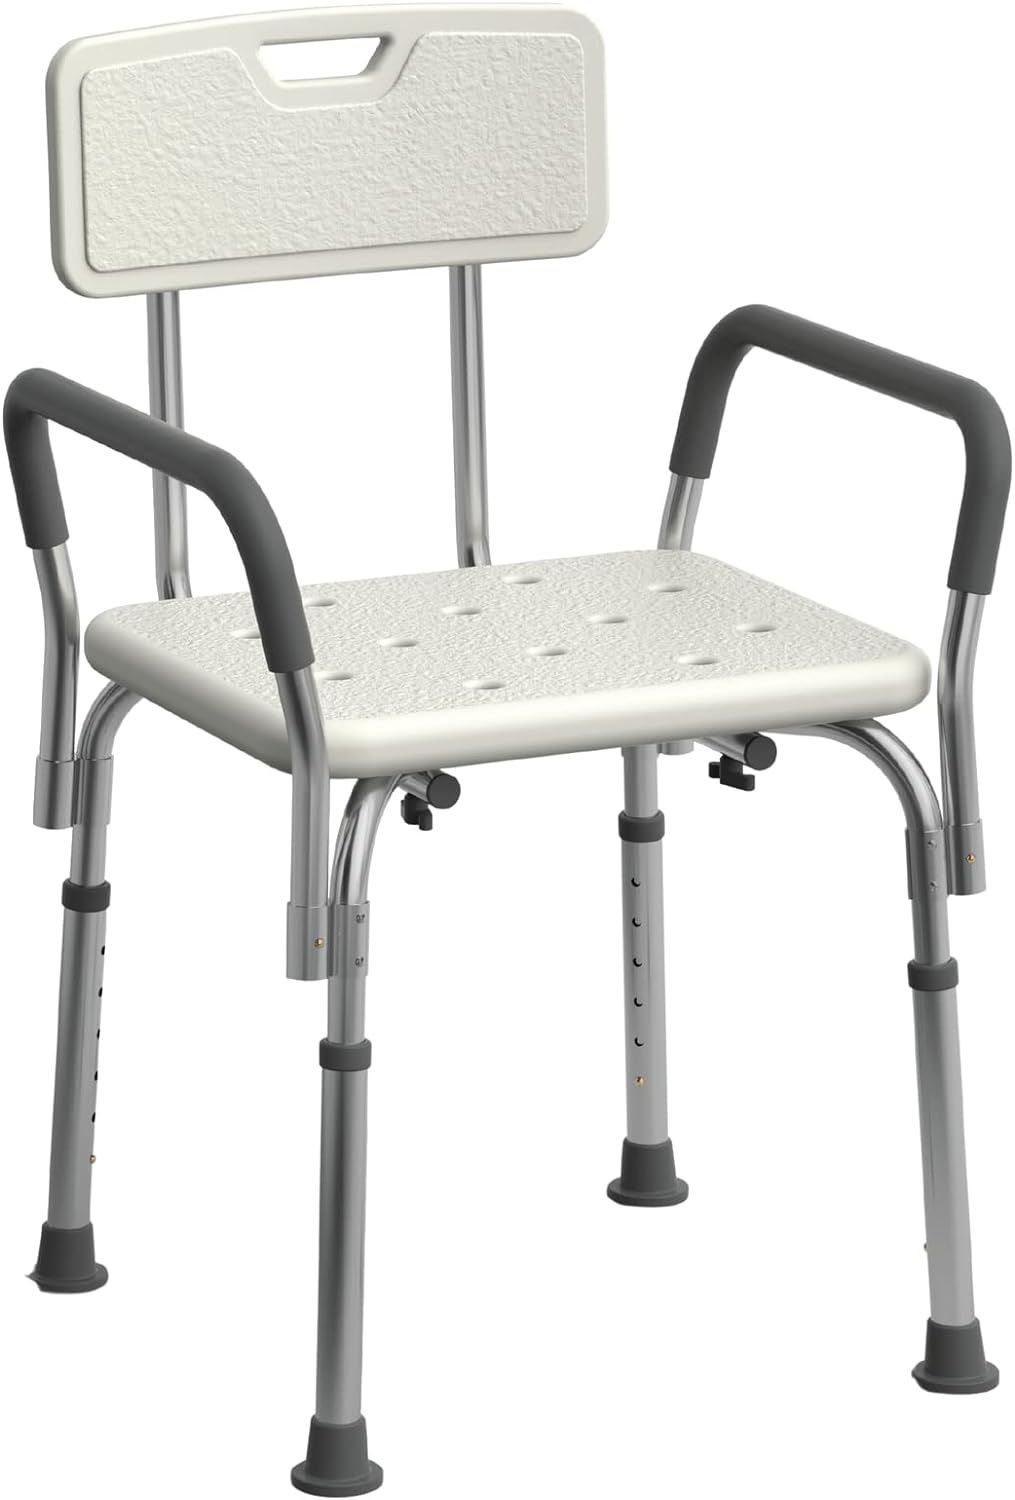 Medline Shower Chair Seat with Padded Armrests and Back Heavy Duty Shower Chair for Bathtub Slip Resistant Shower Seat with Adjustable Height Shower C